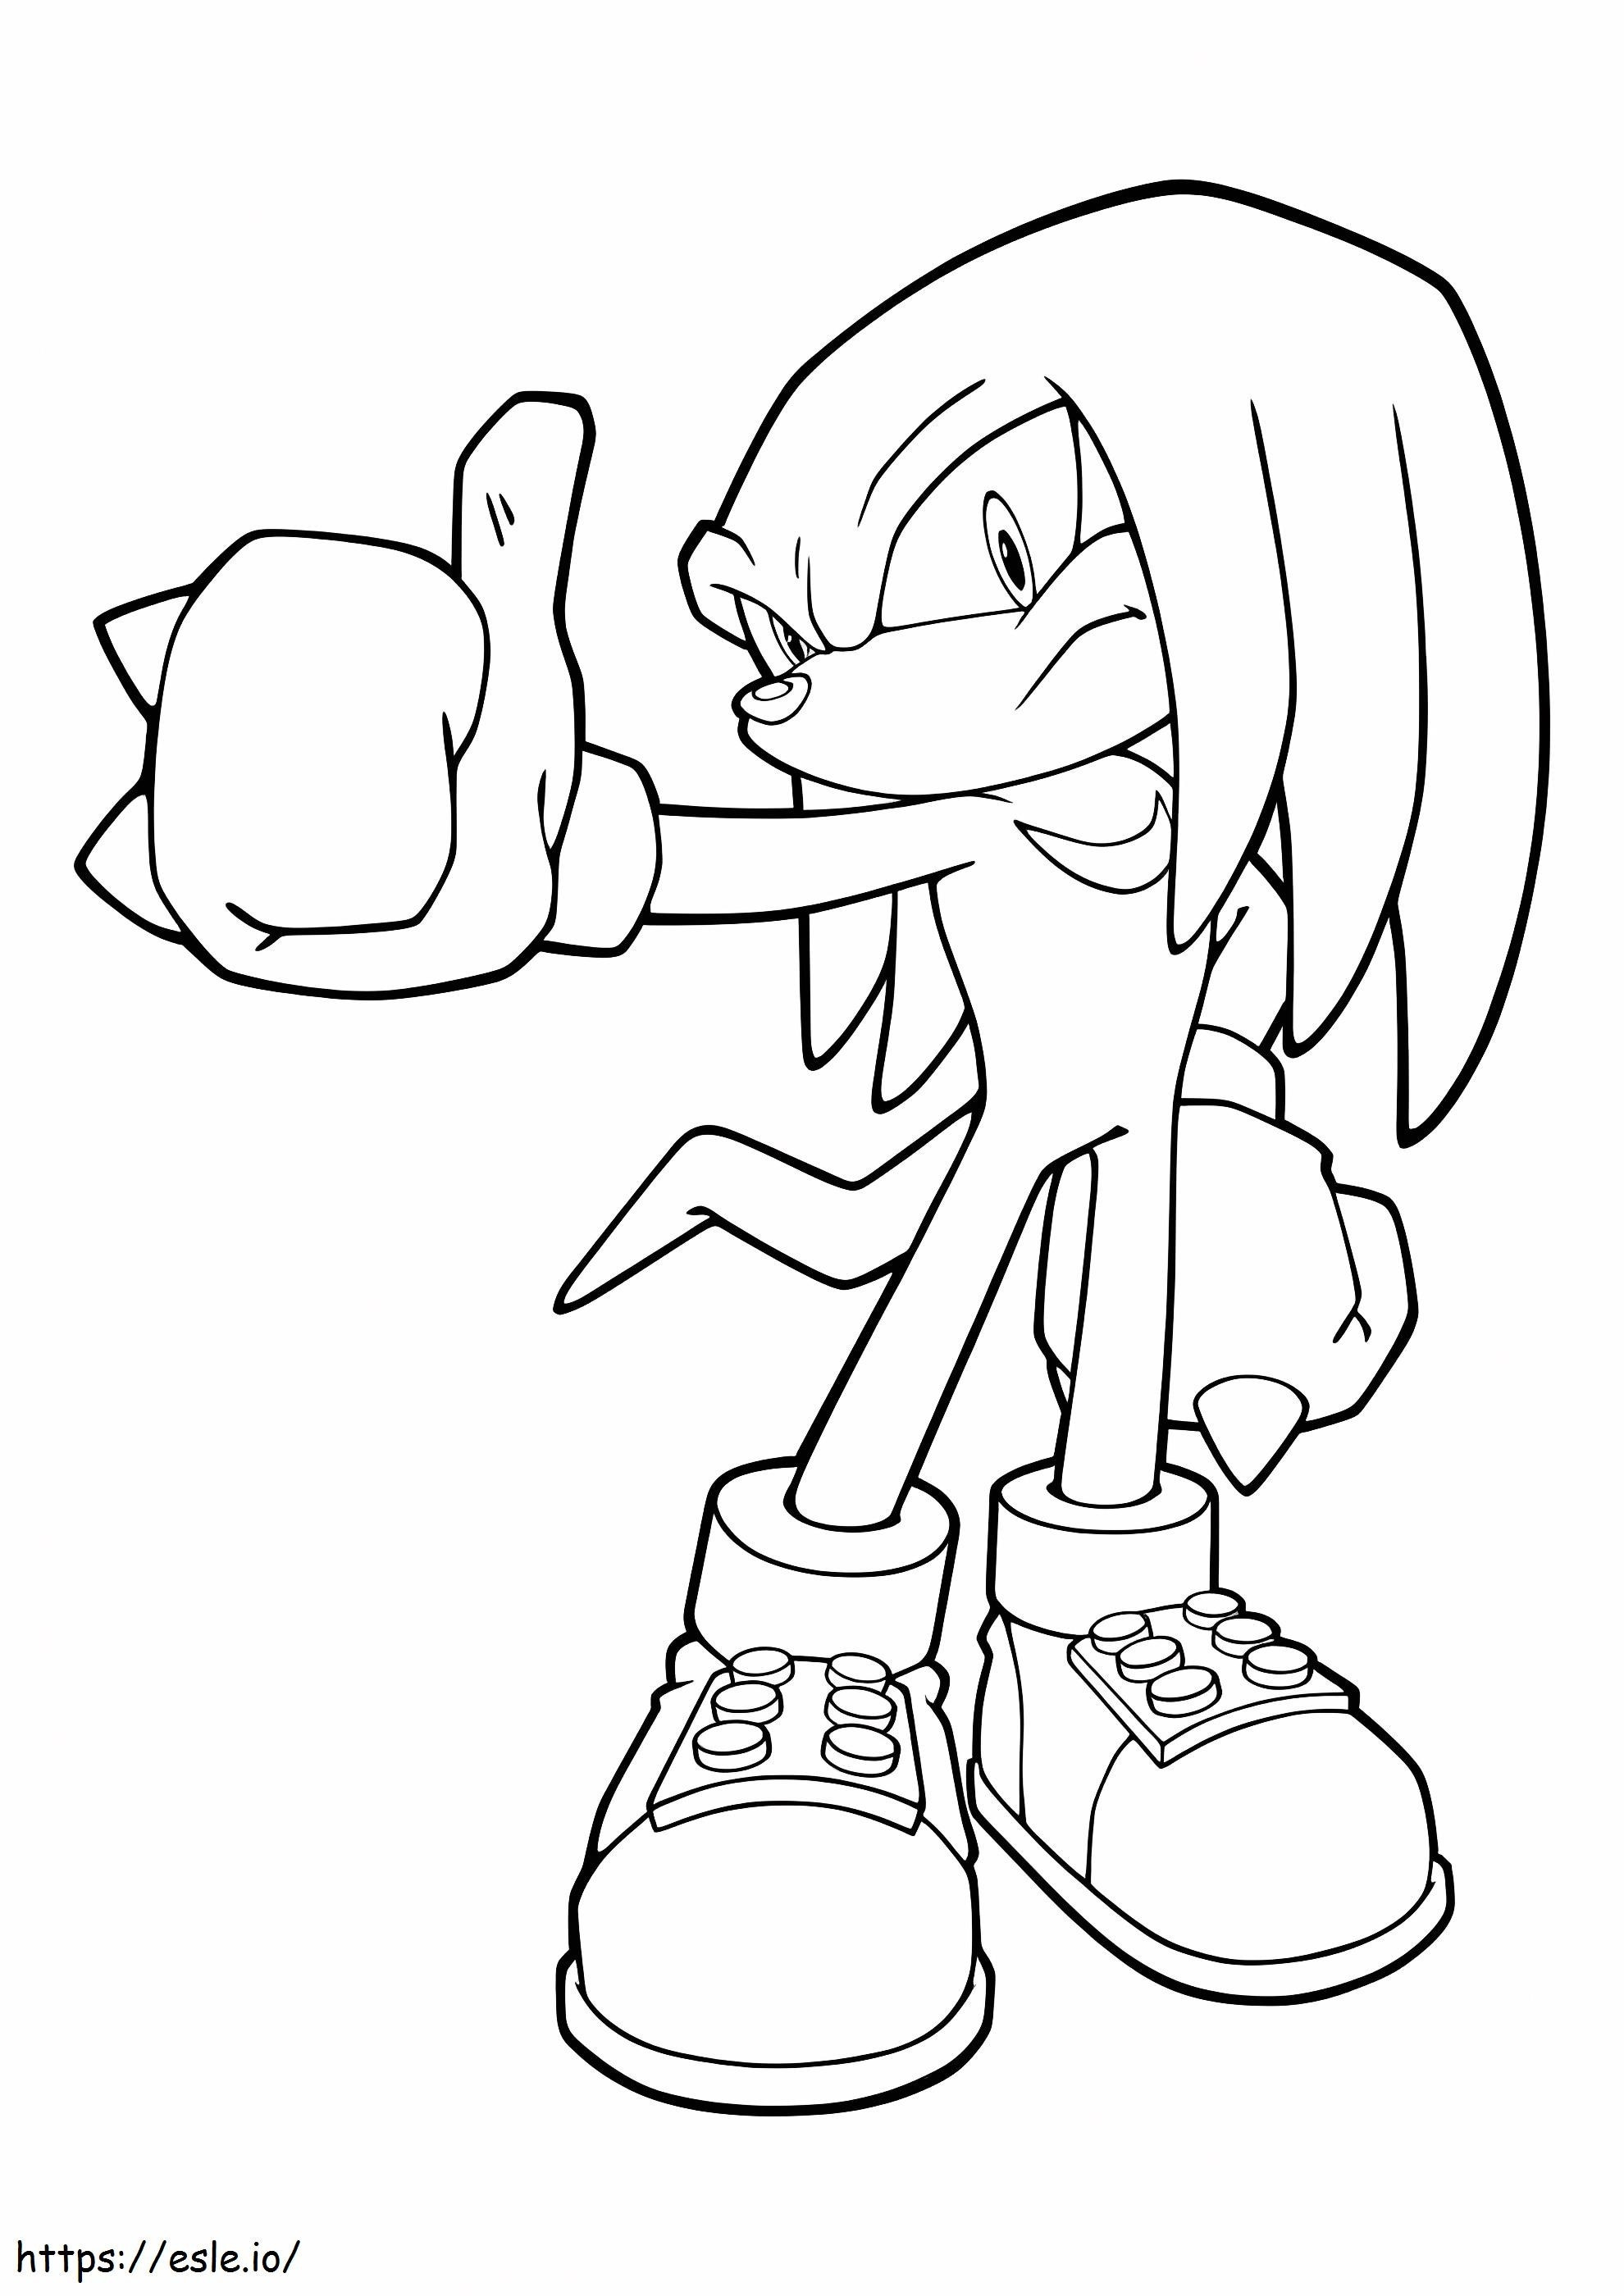 Knuckles The Echidna Is Cool coloring page